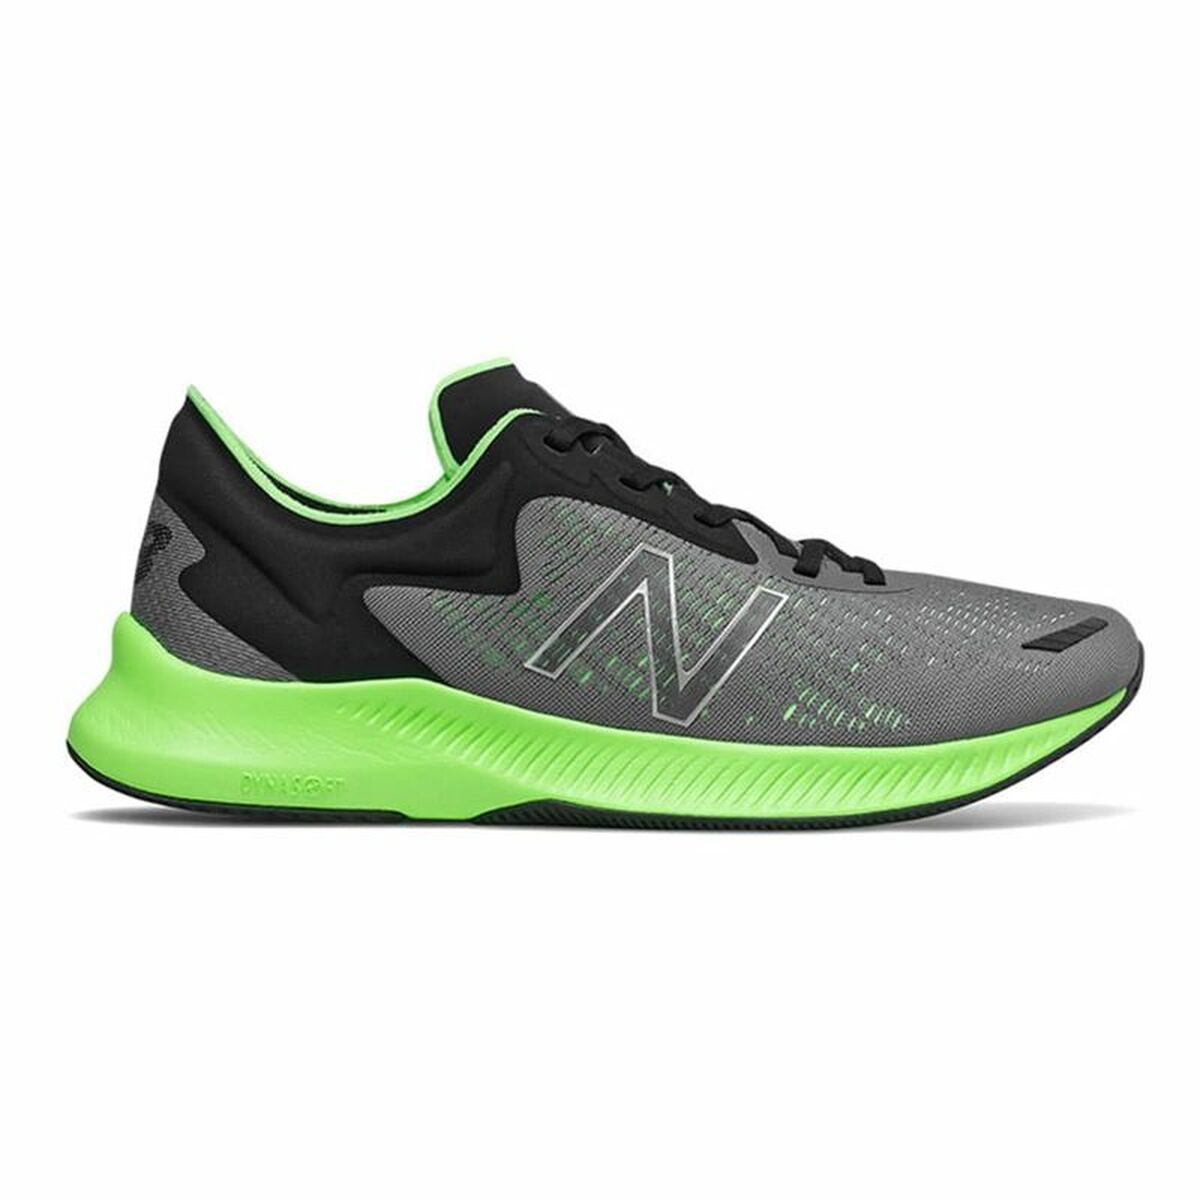 Chaussures de Running pour Adultes New Balance MPESULL1 Gris Vert